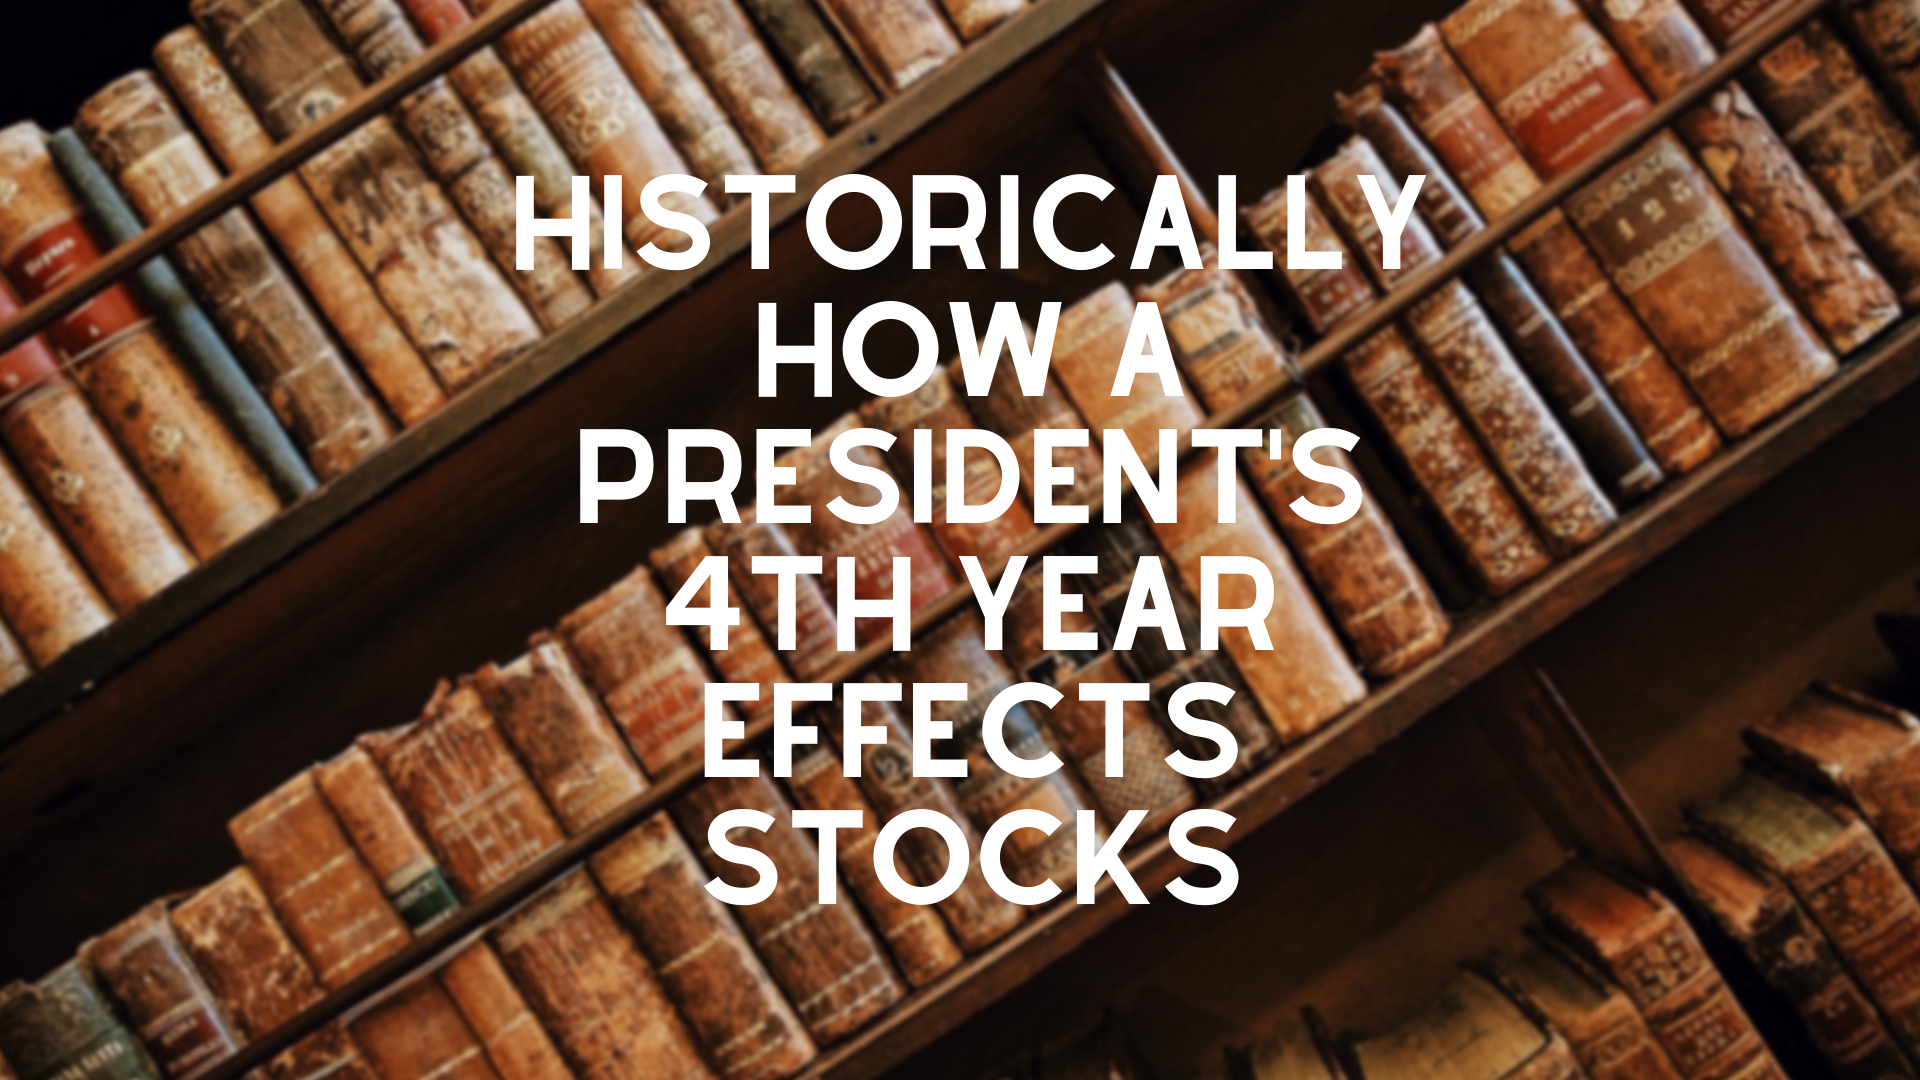 What Does History Suggest for the Markets in the 4th Year of a President’s Term?